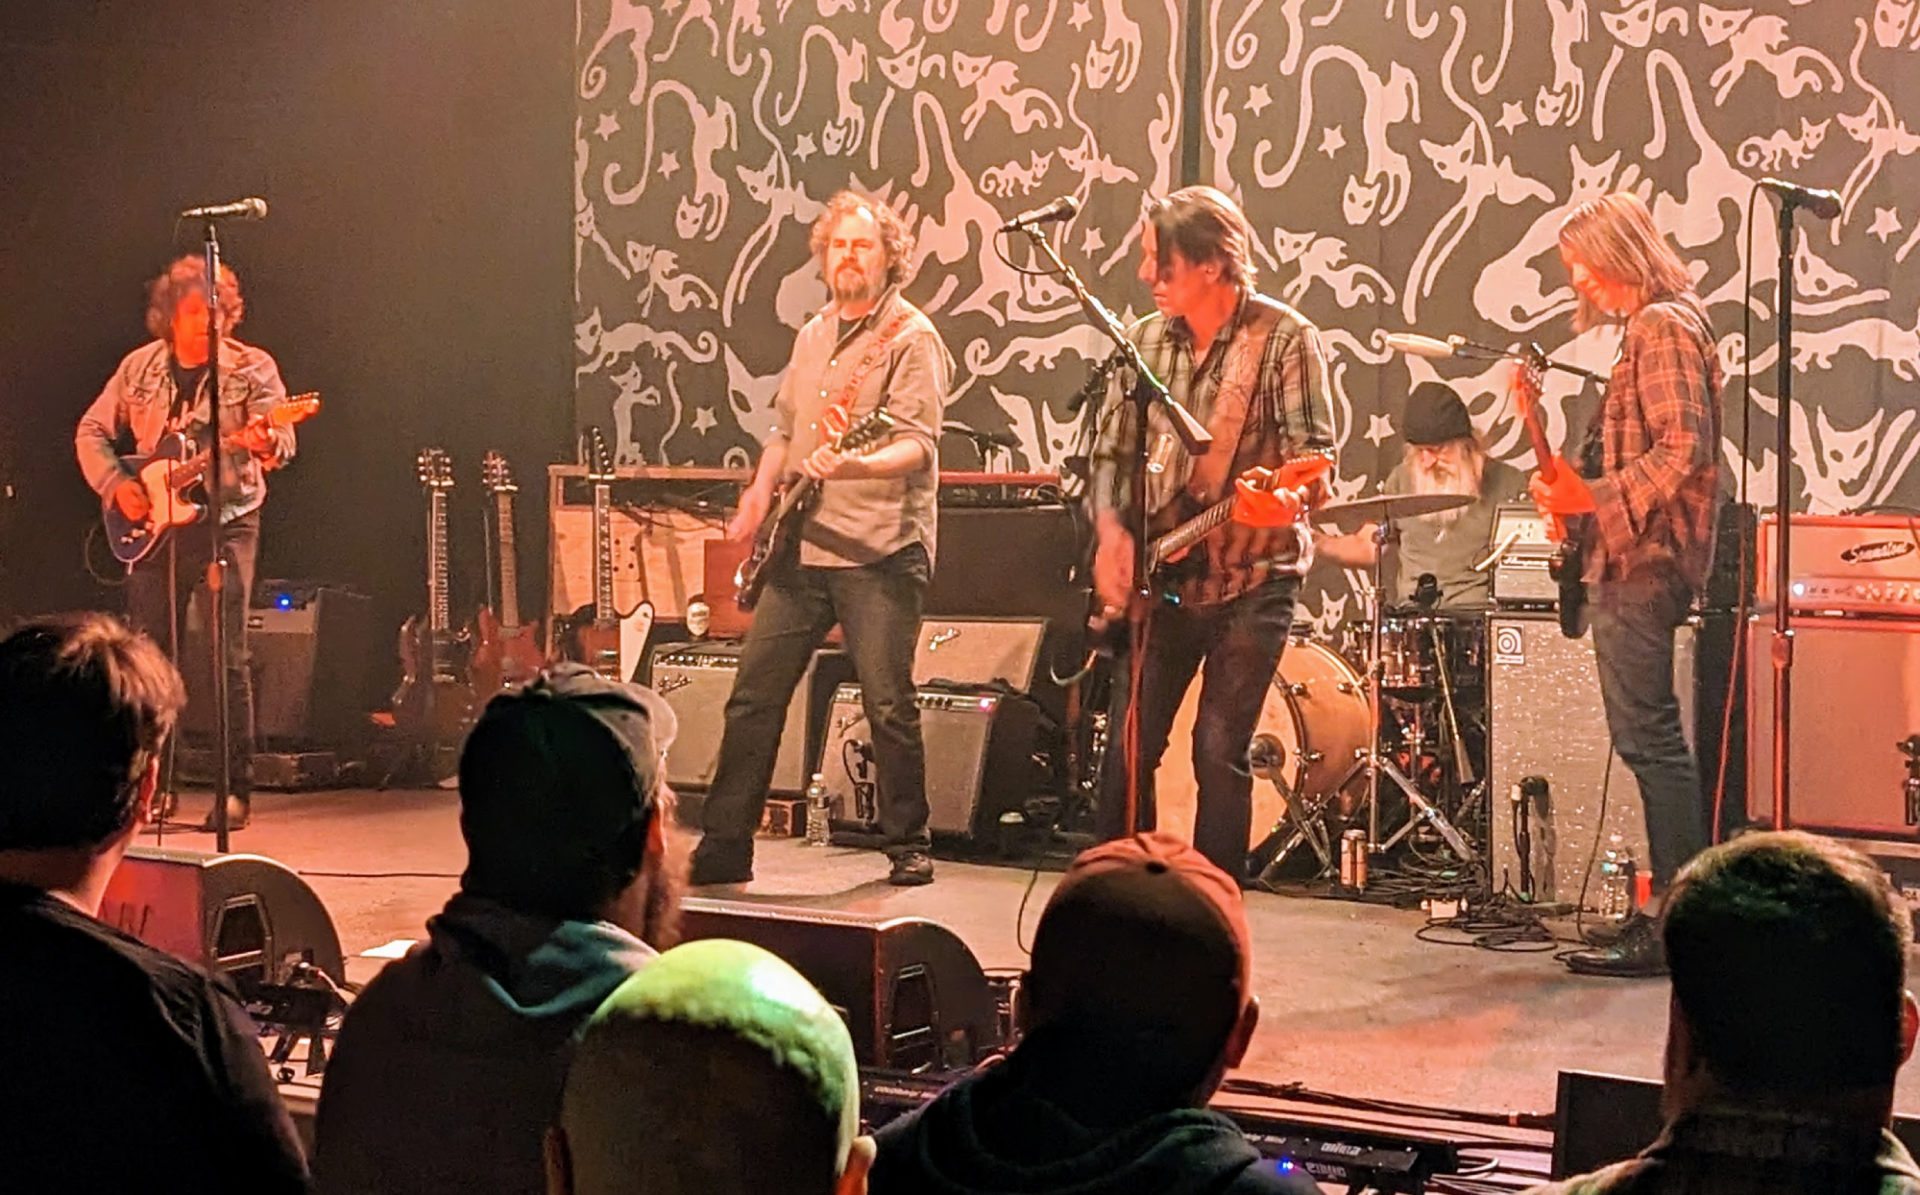 Drive-By Truckers performing at Canopy Club in Urbana. Five middle aged white-presenting men are playing instruments on a stage. A crowd looks on.